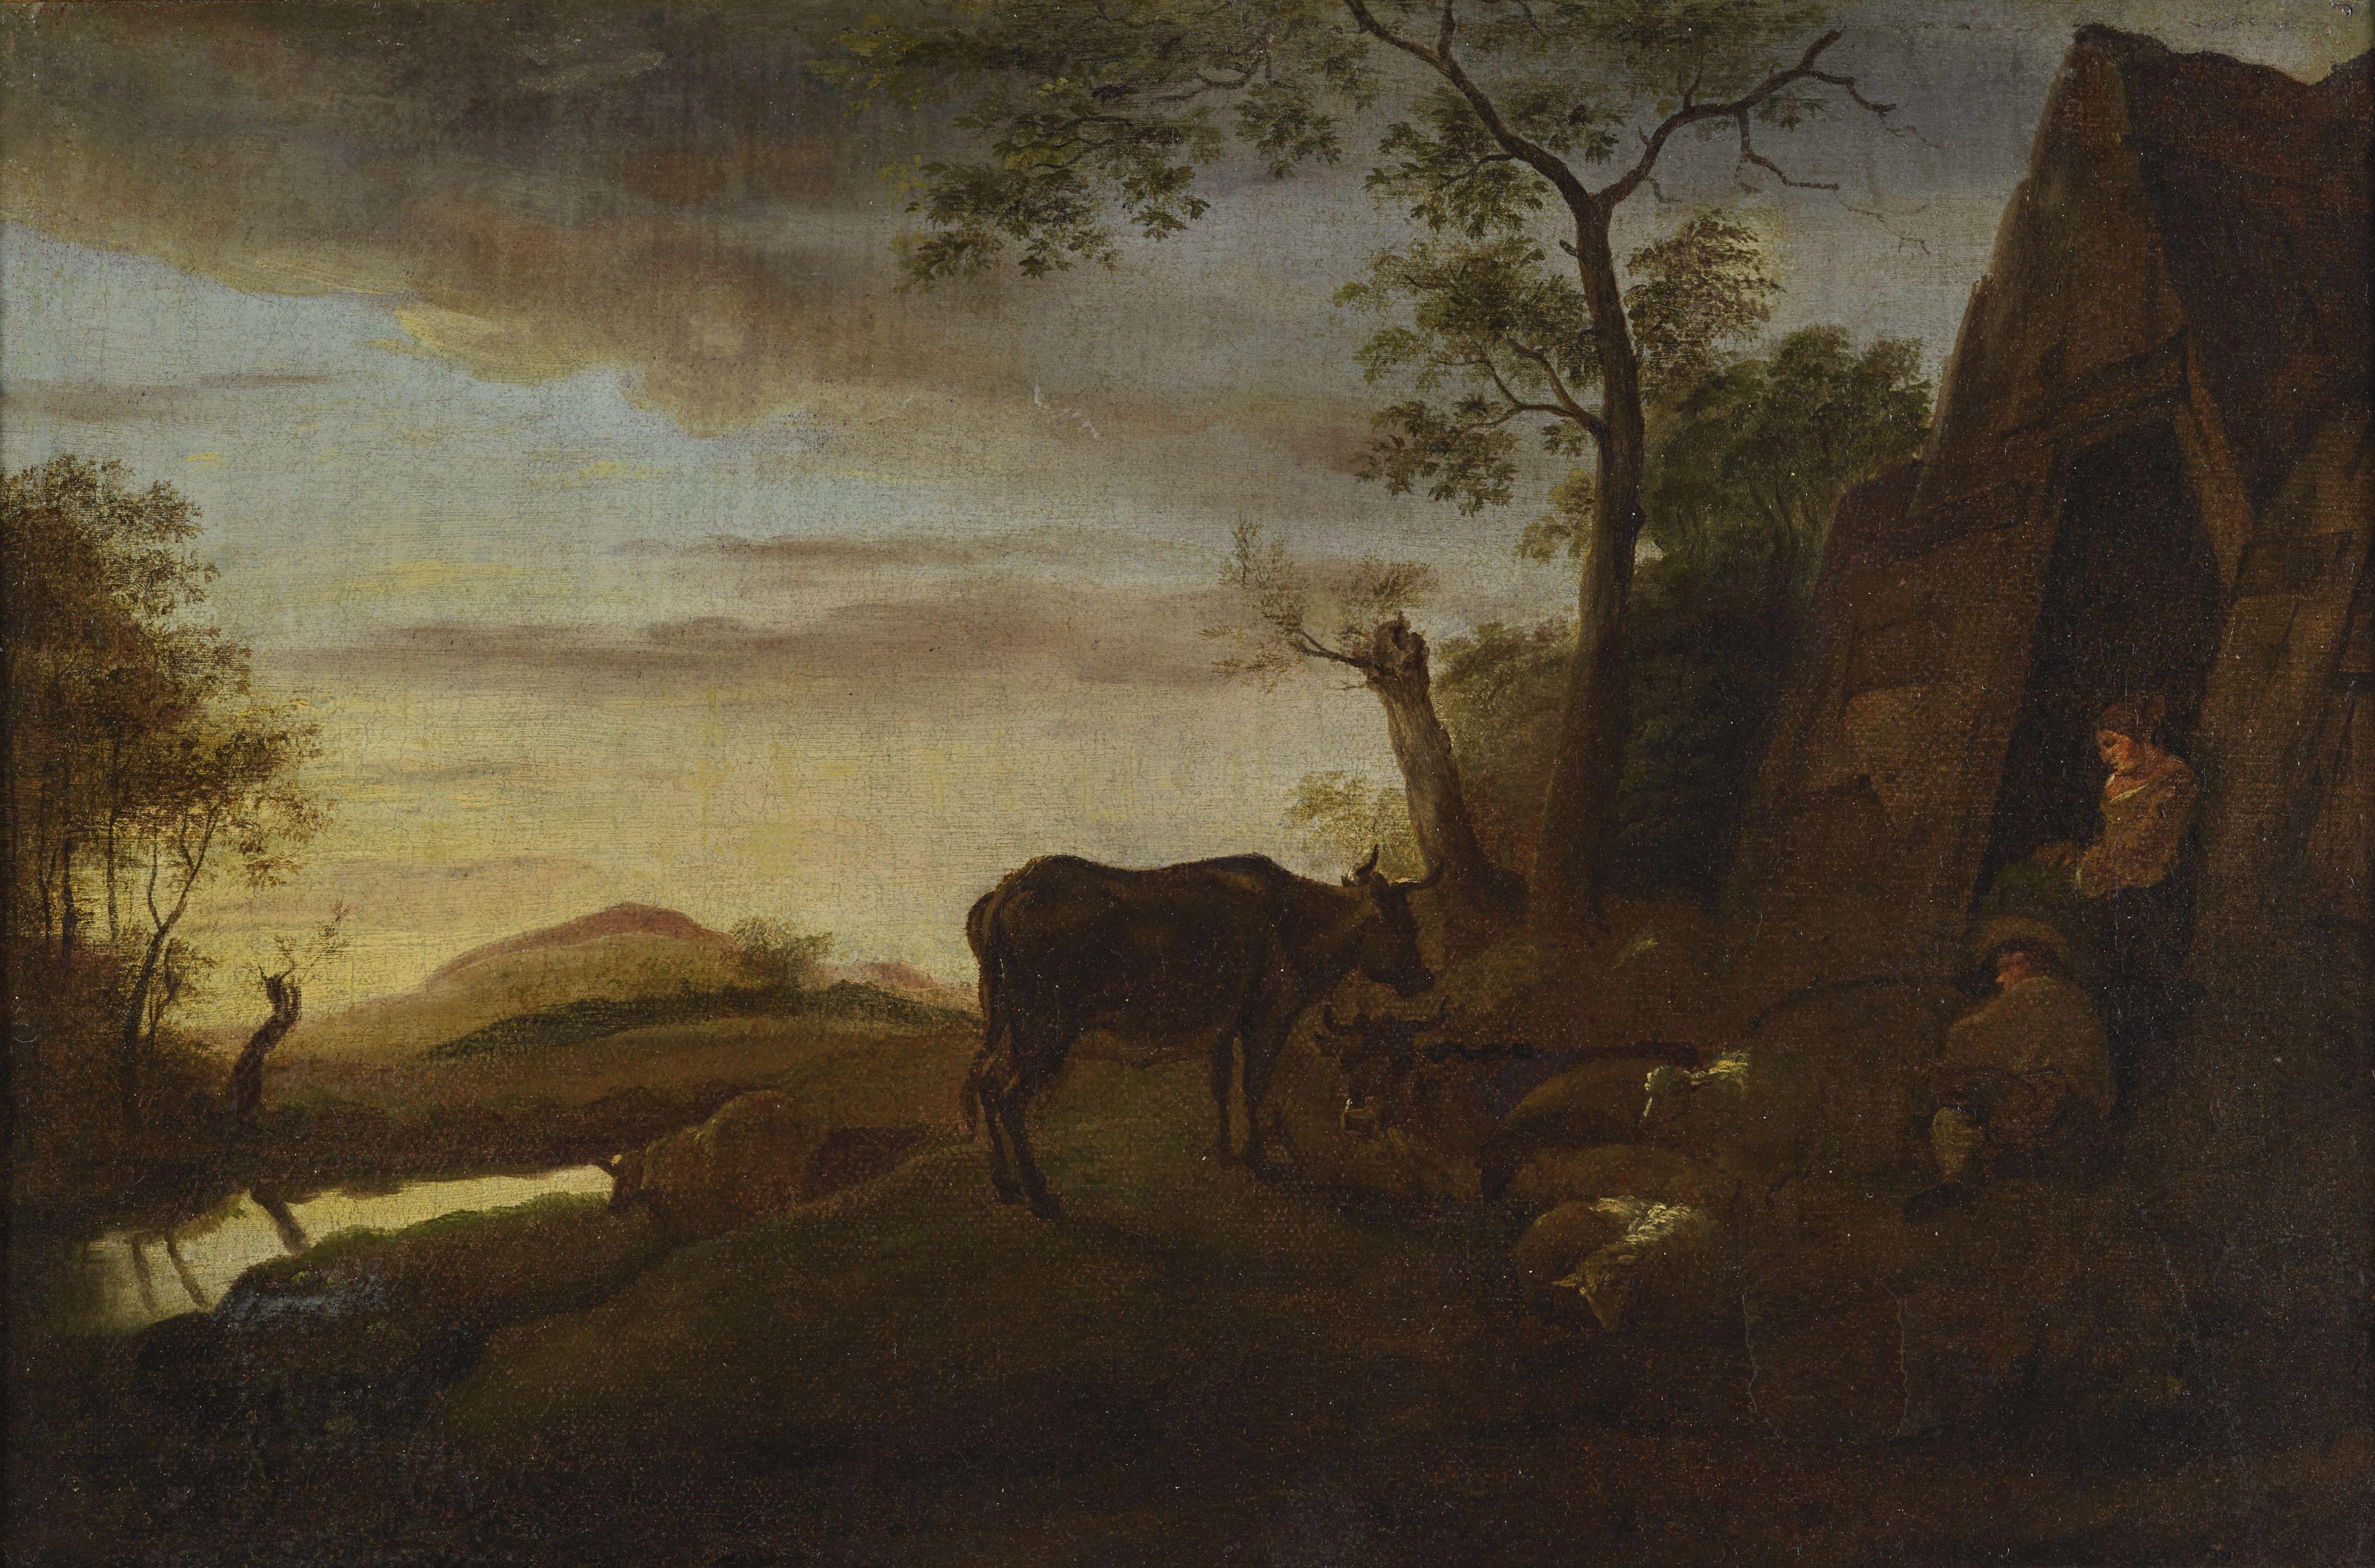 Flemish painting measuring 44 x 30 cm without frame and 53 x 39 cm with frame depicting a landscape with figures, in soft tones and with a strong sense of perspective; elegant, fluid painting with a strong emphasis on the love of nature.

The